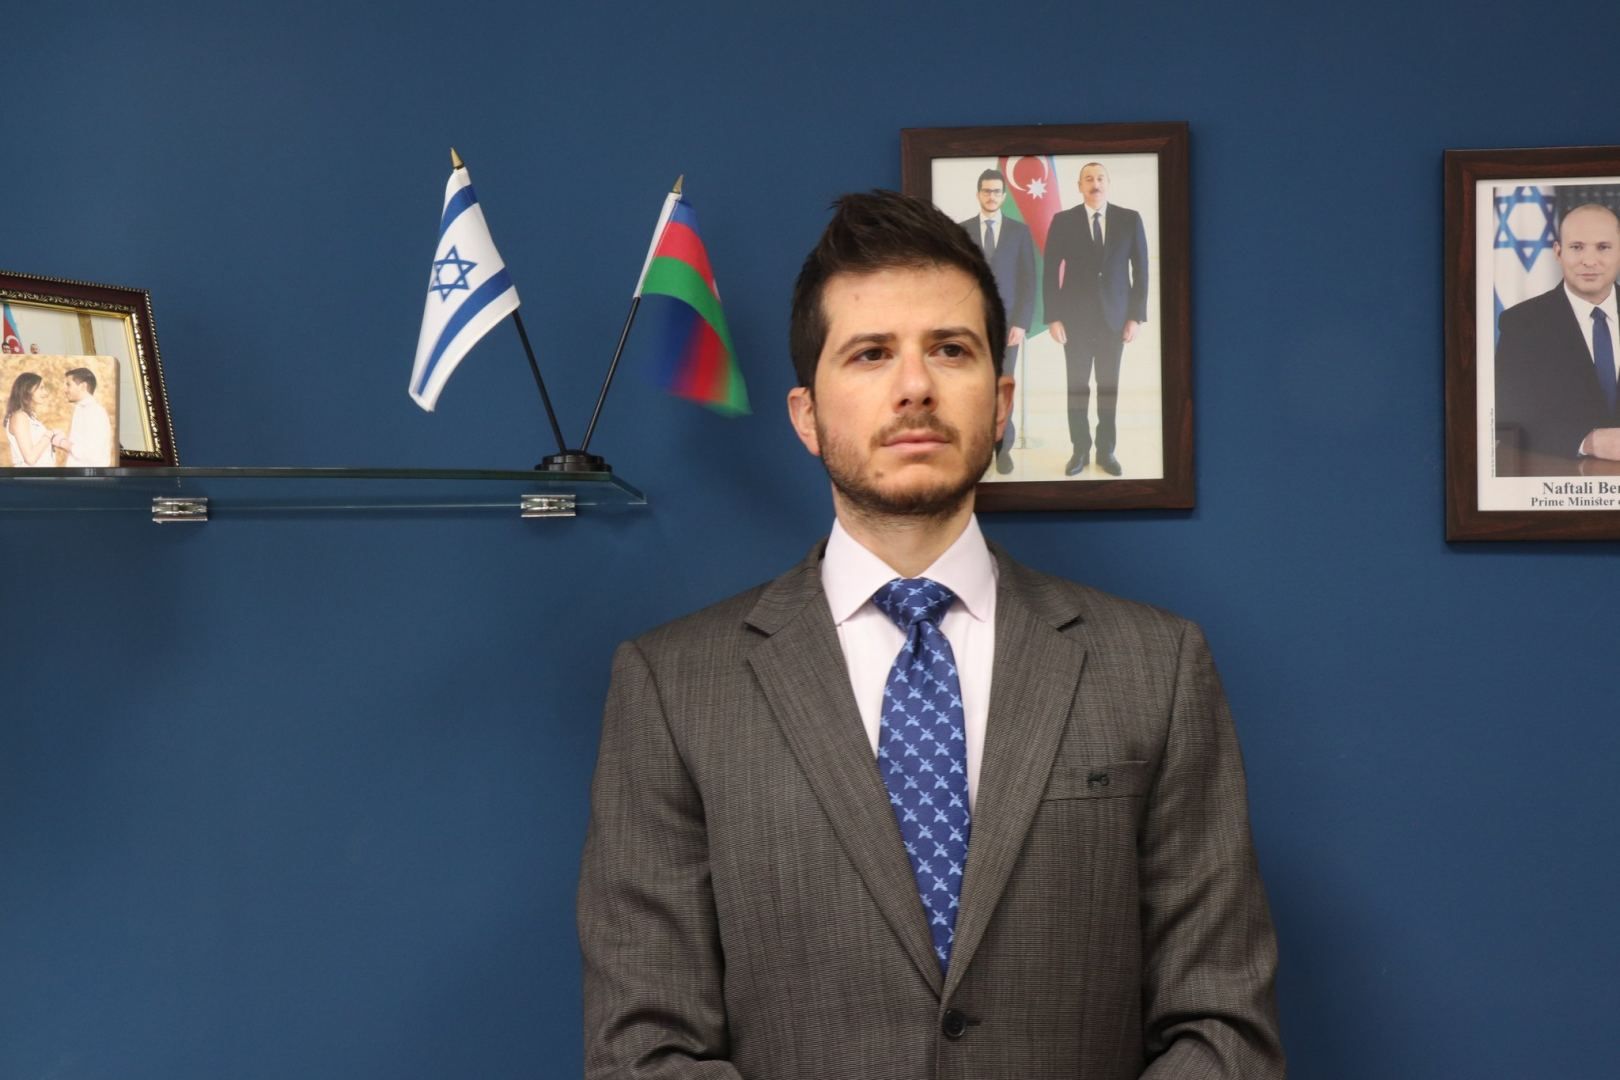 Israeli companies eager to participate in renewable energy projects in Azerbaijan - ambassador